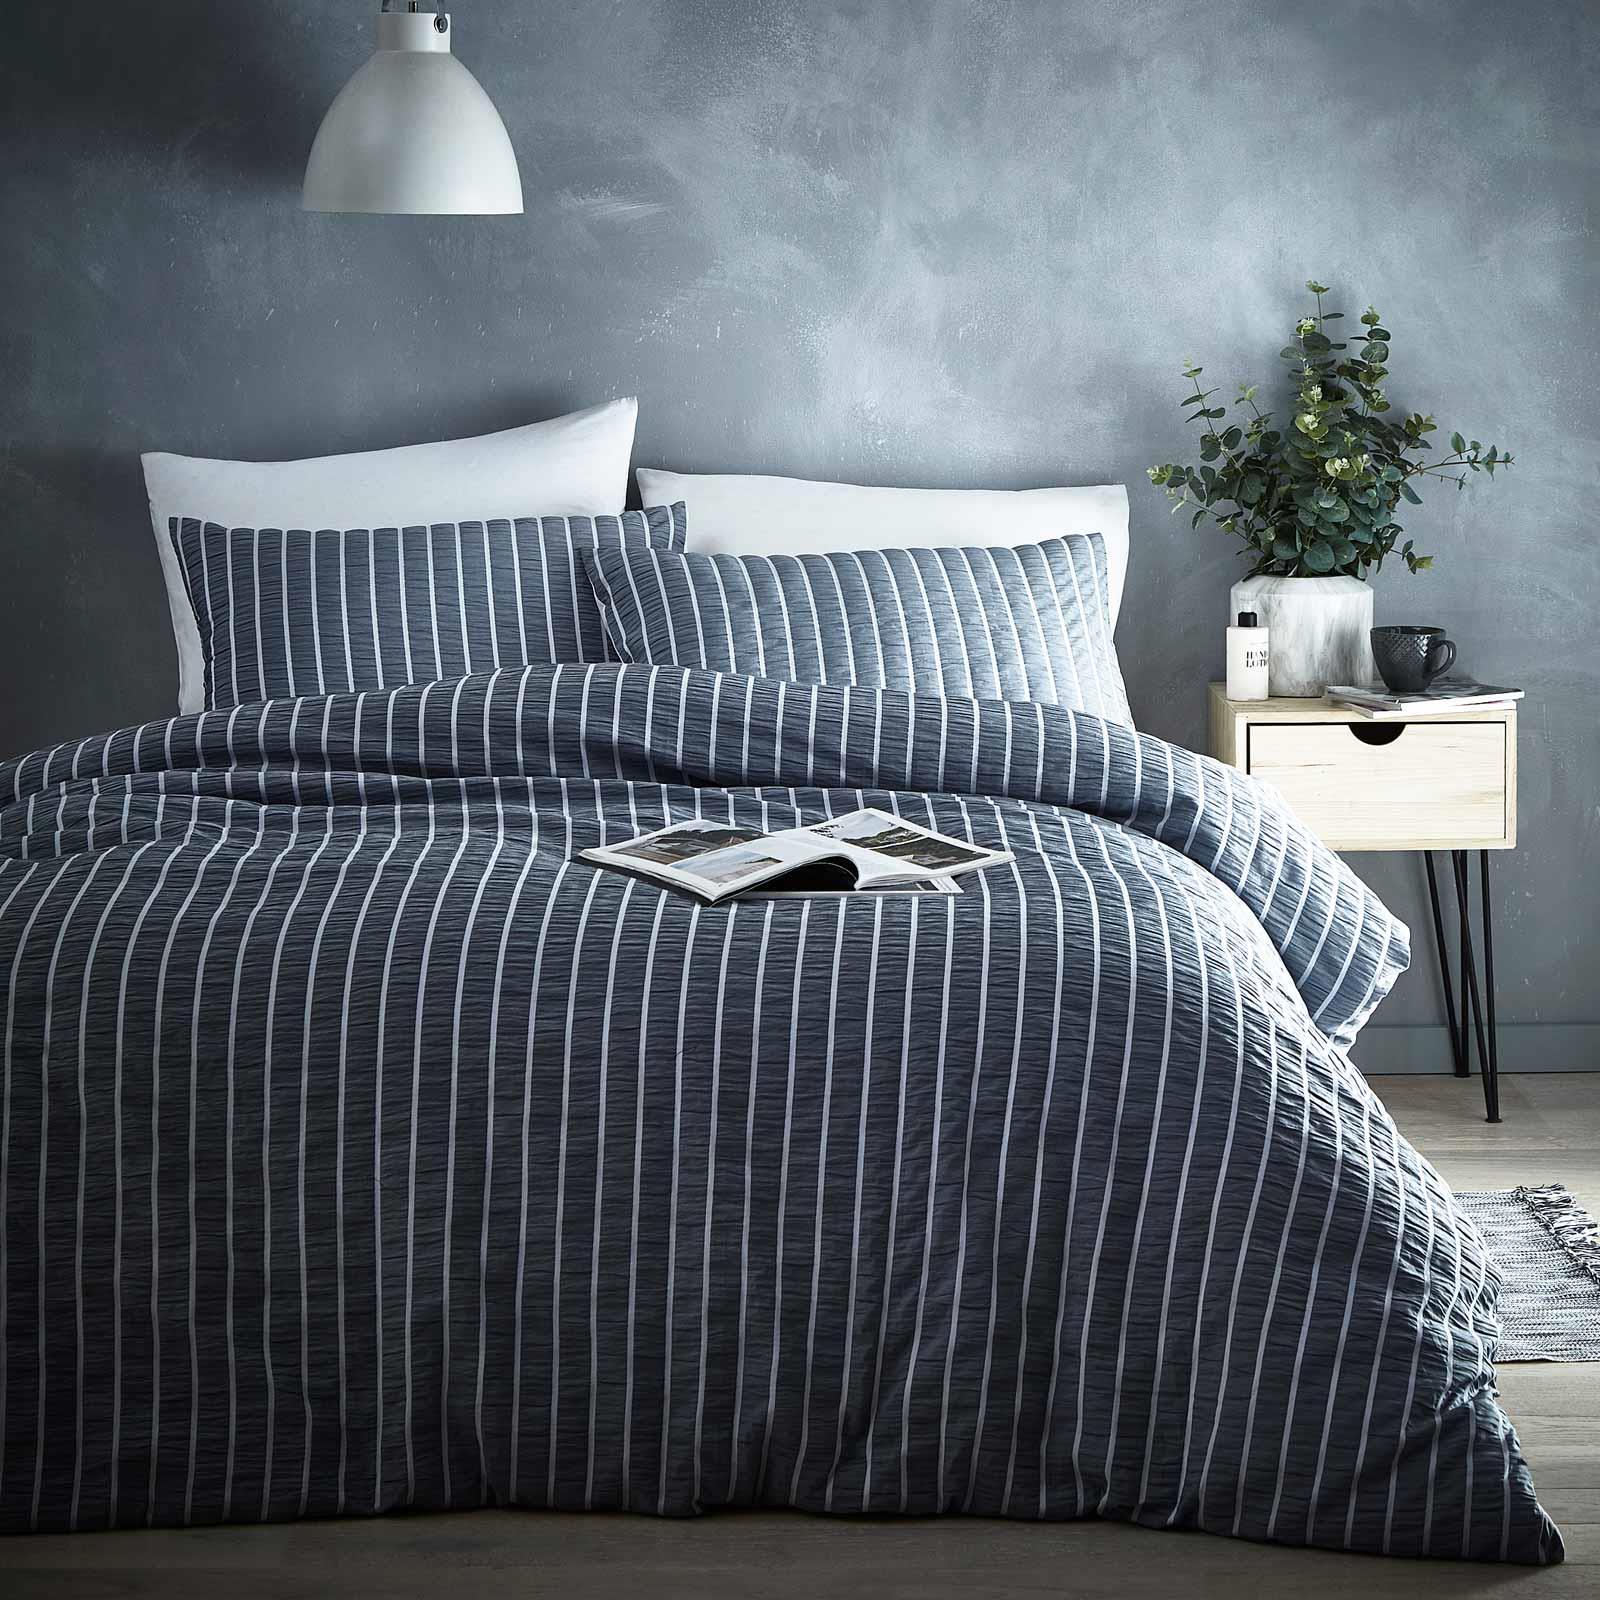 About modern duvet covers